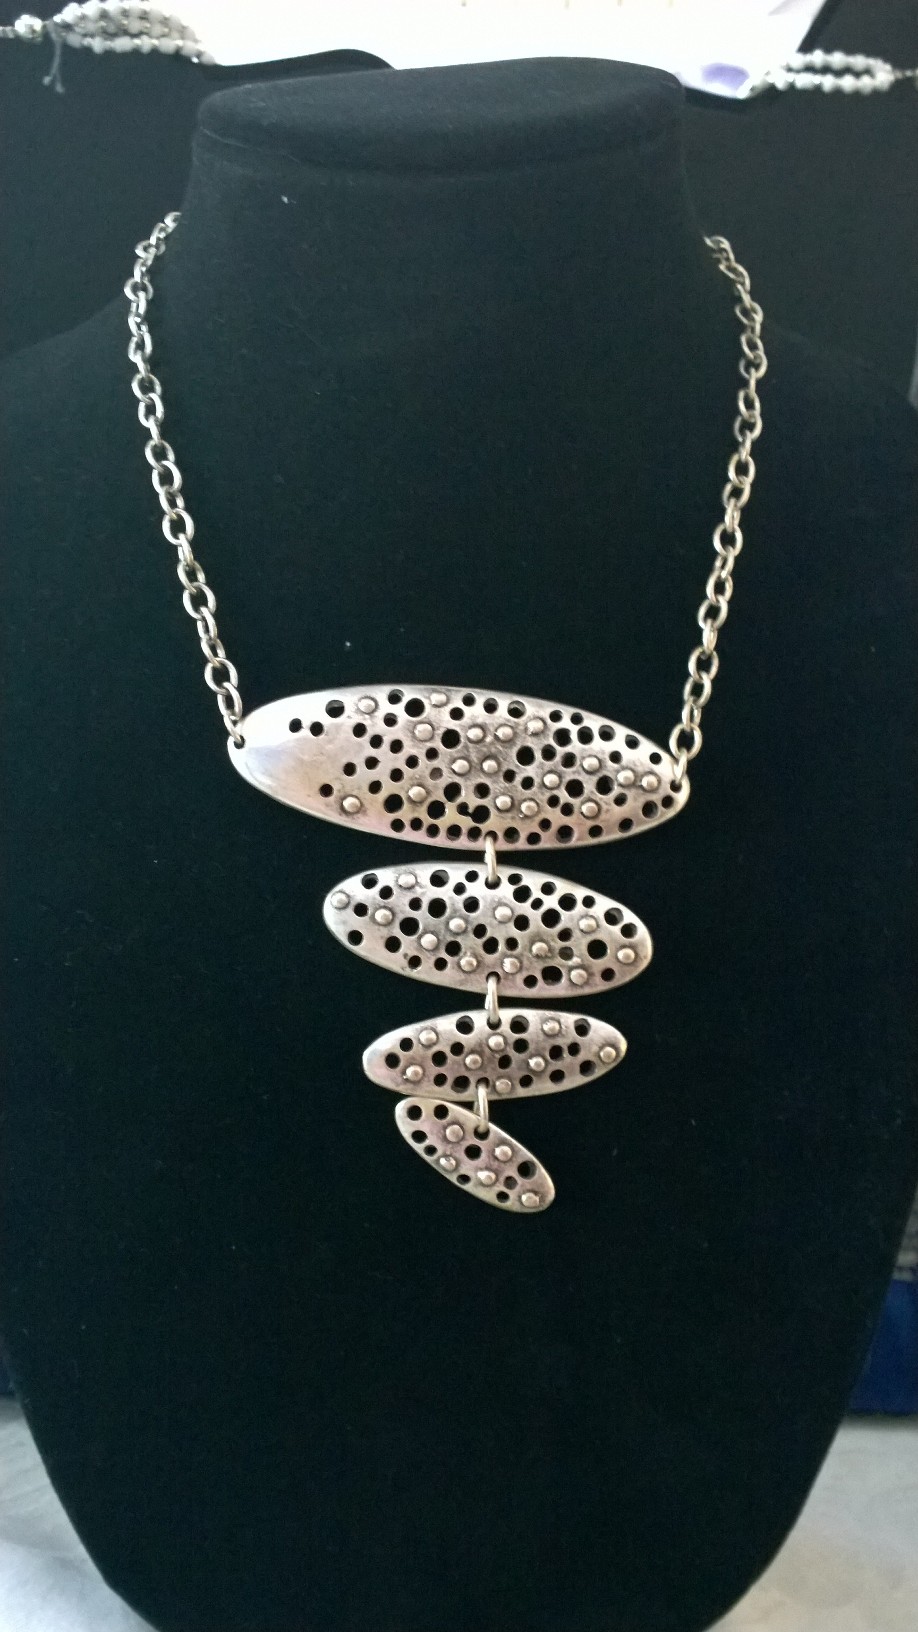 4 Ovals Necklace 1N28